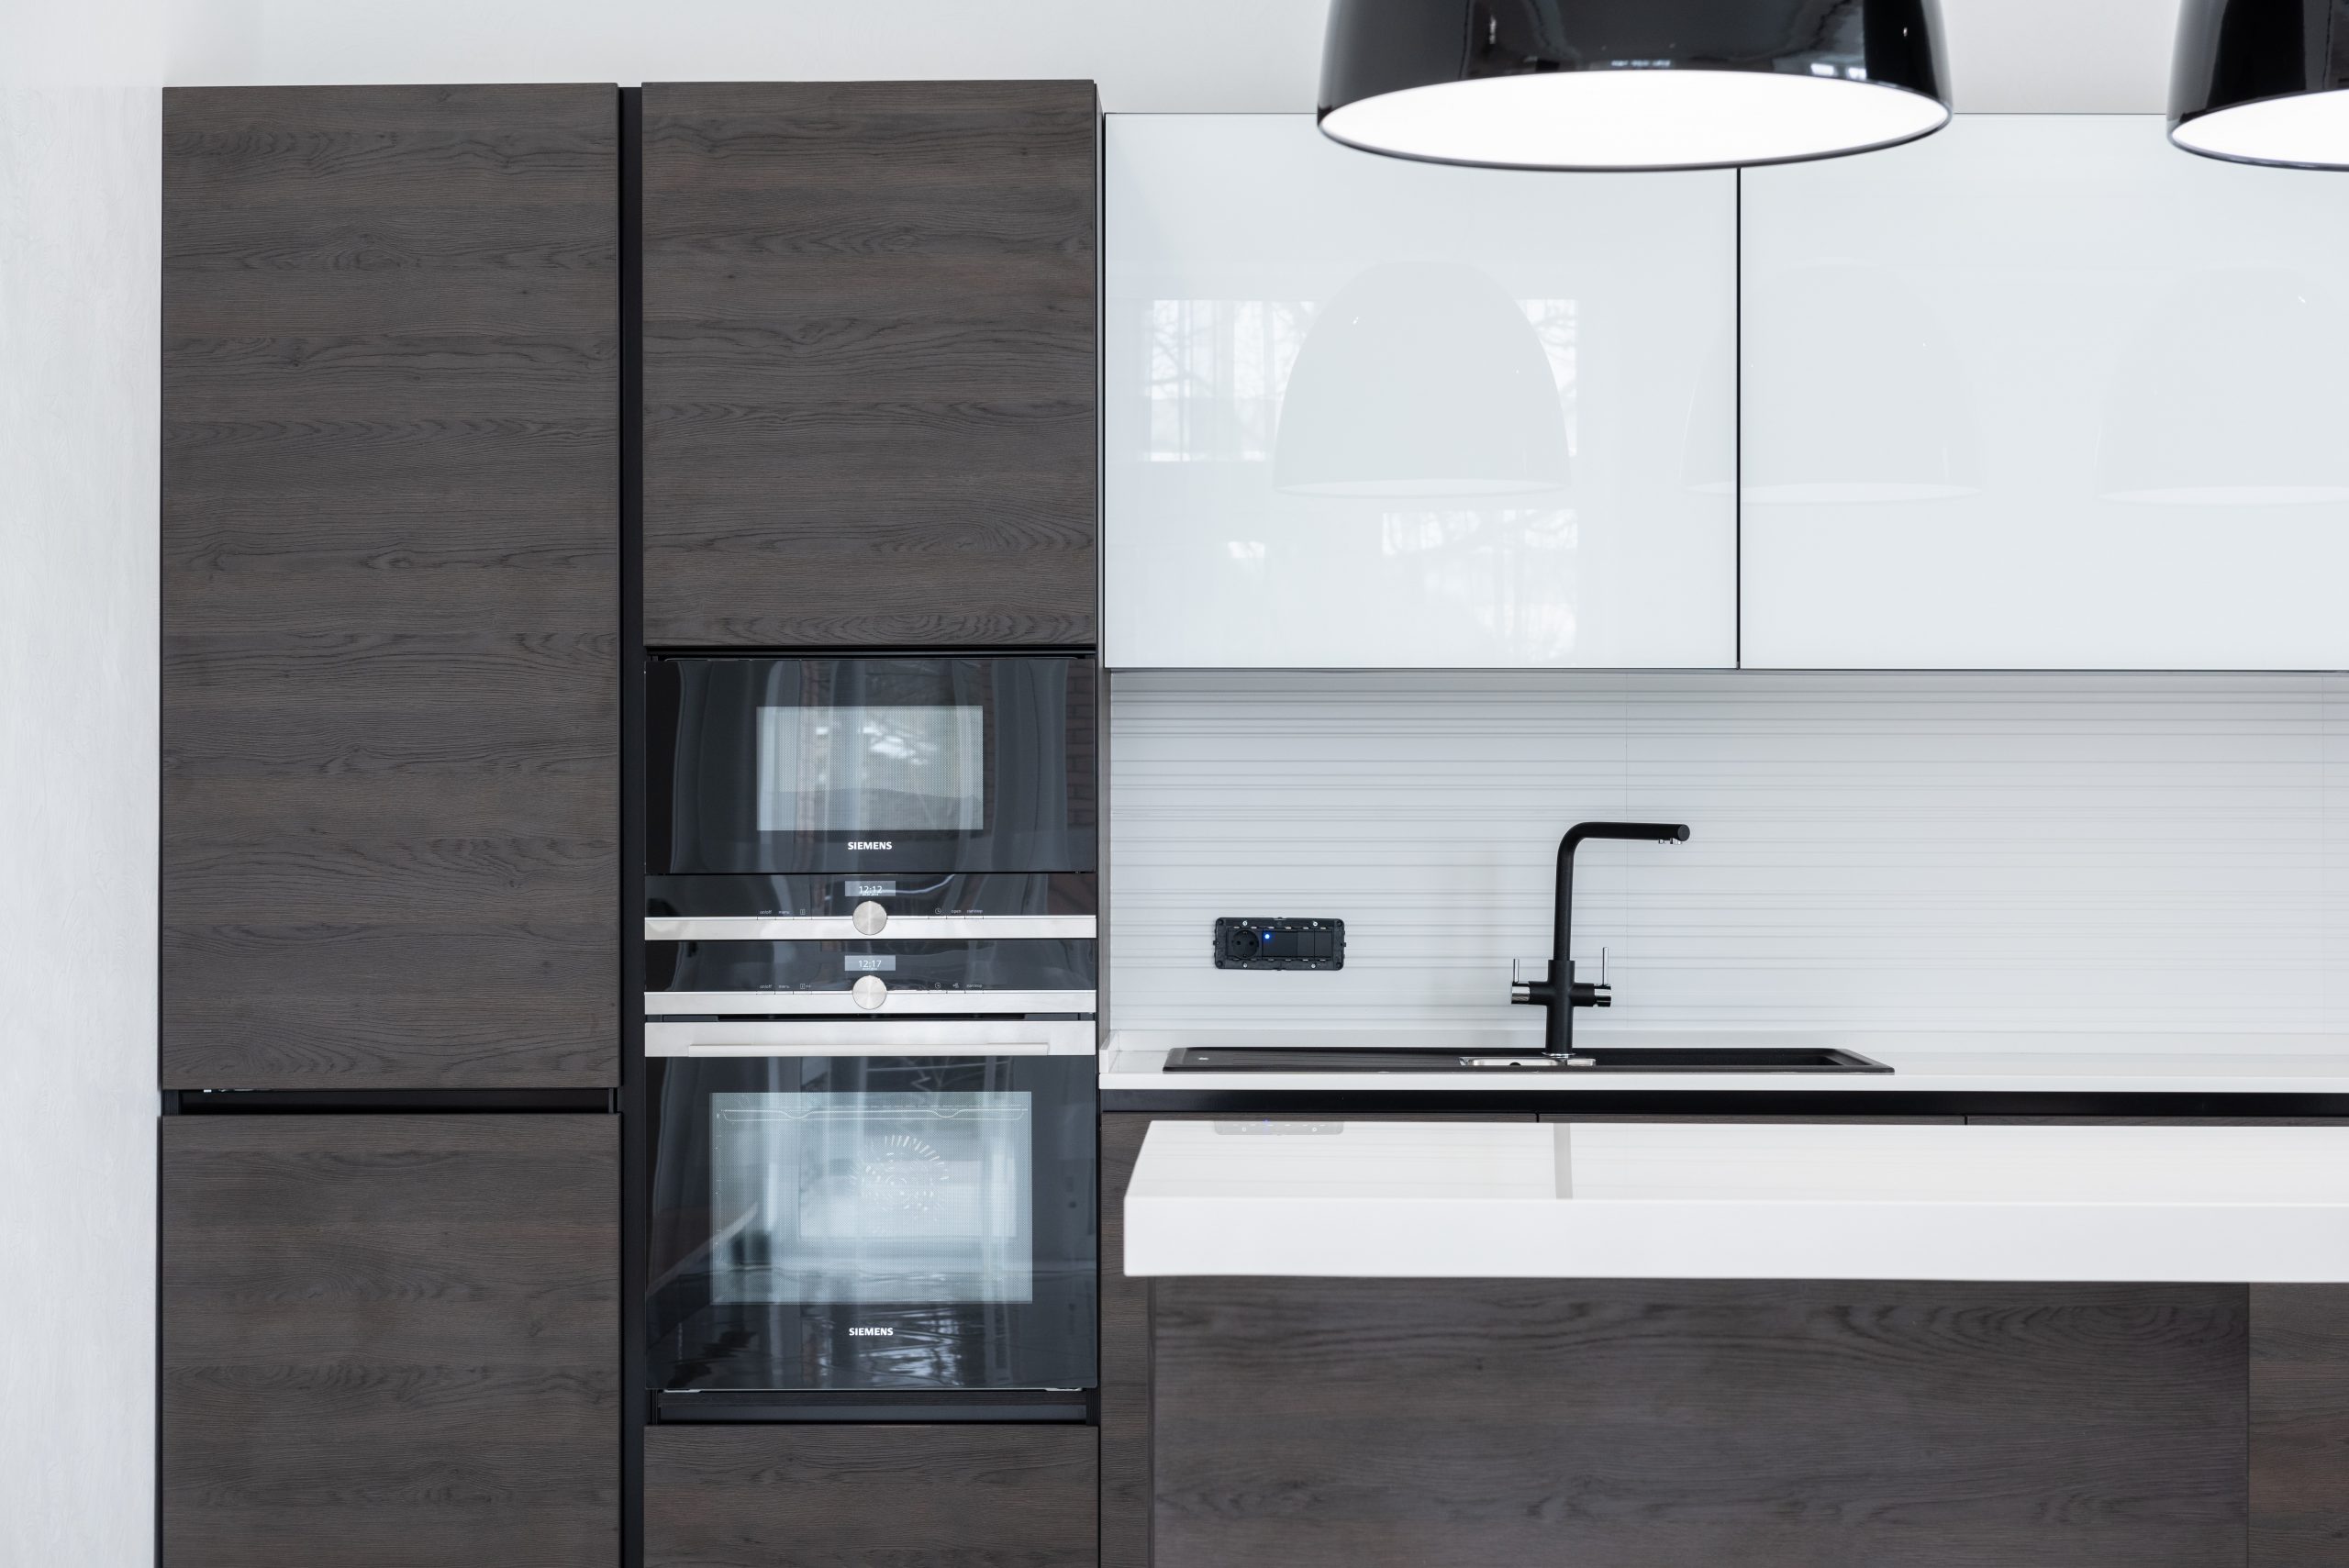 Appliances for modern kitchens – we suggest what is worth having